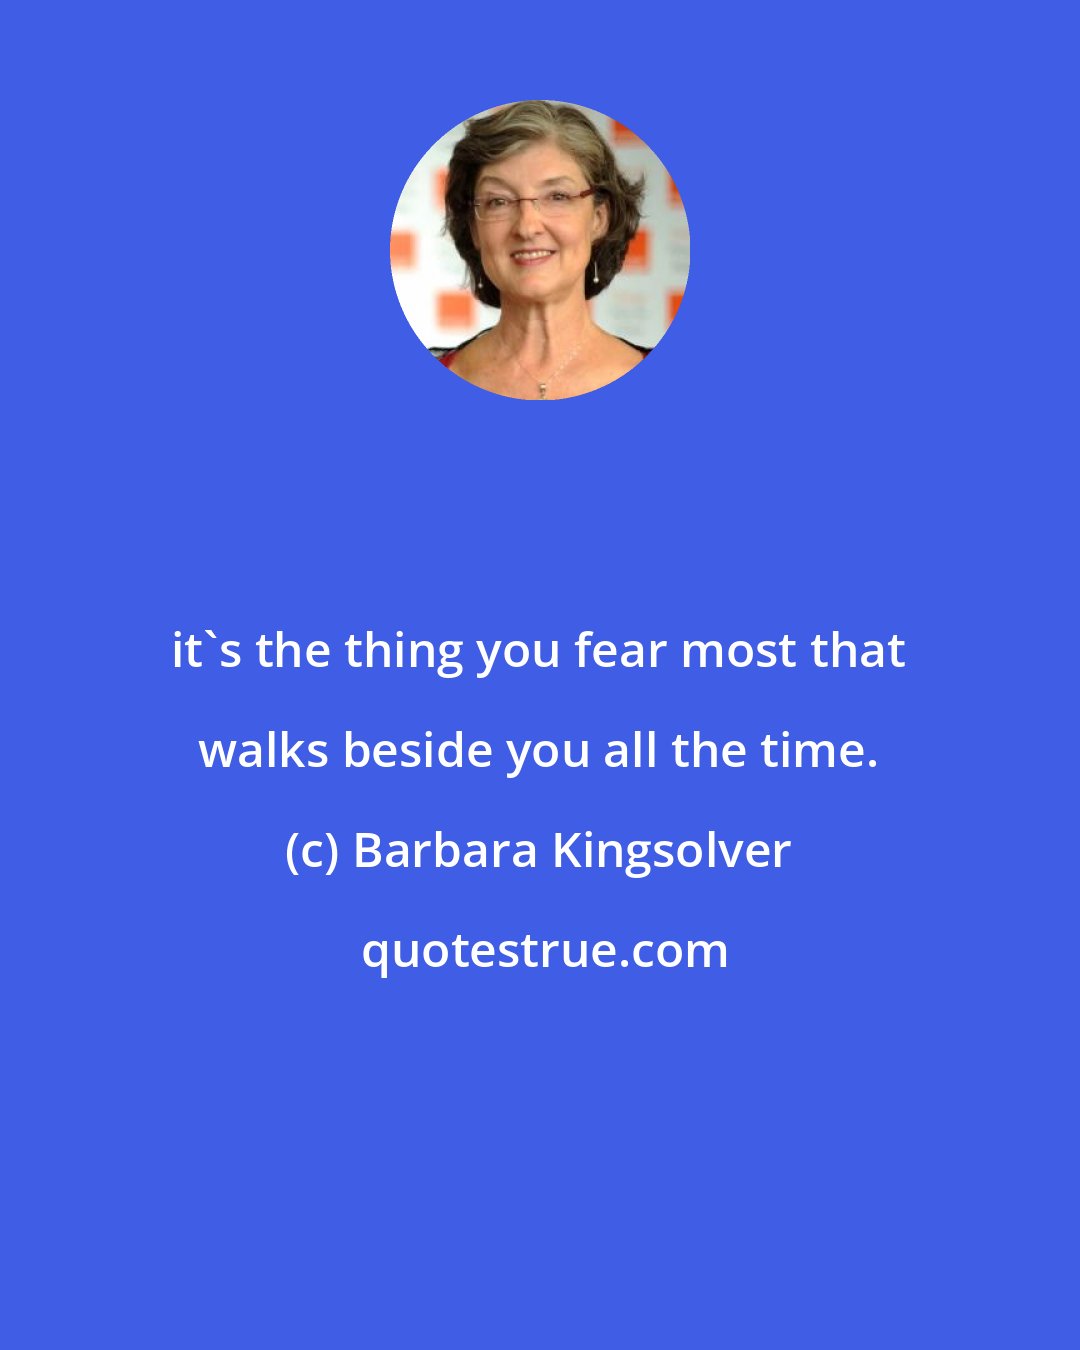 Barbara Kingsolver: it's the thing you fear most that walks beside you all the time.